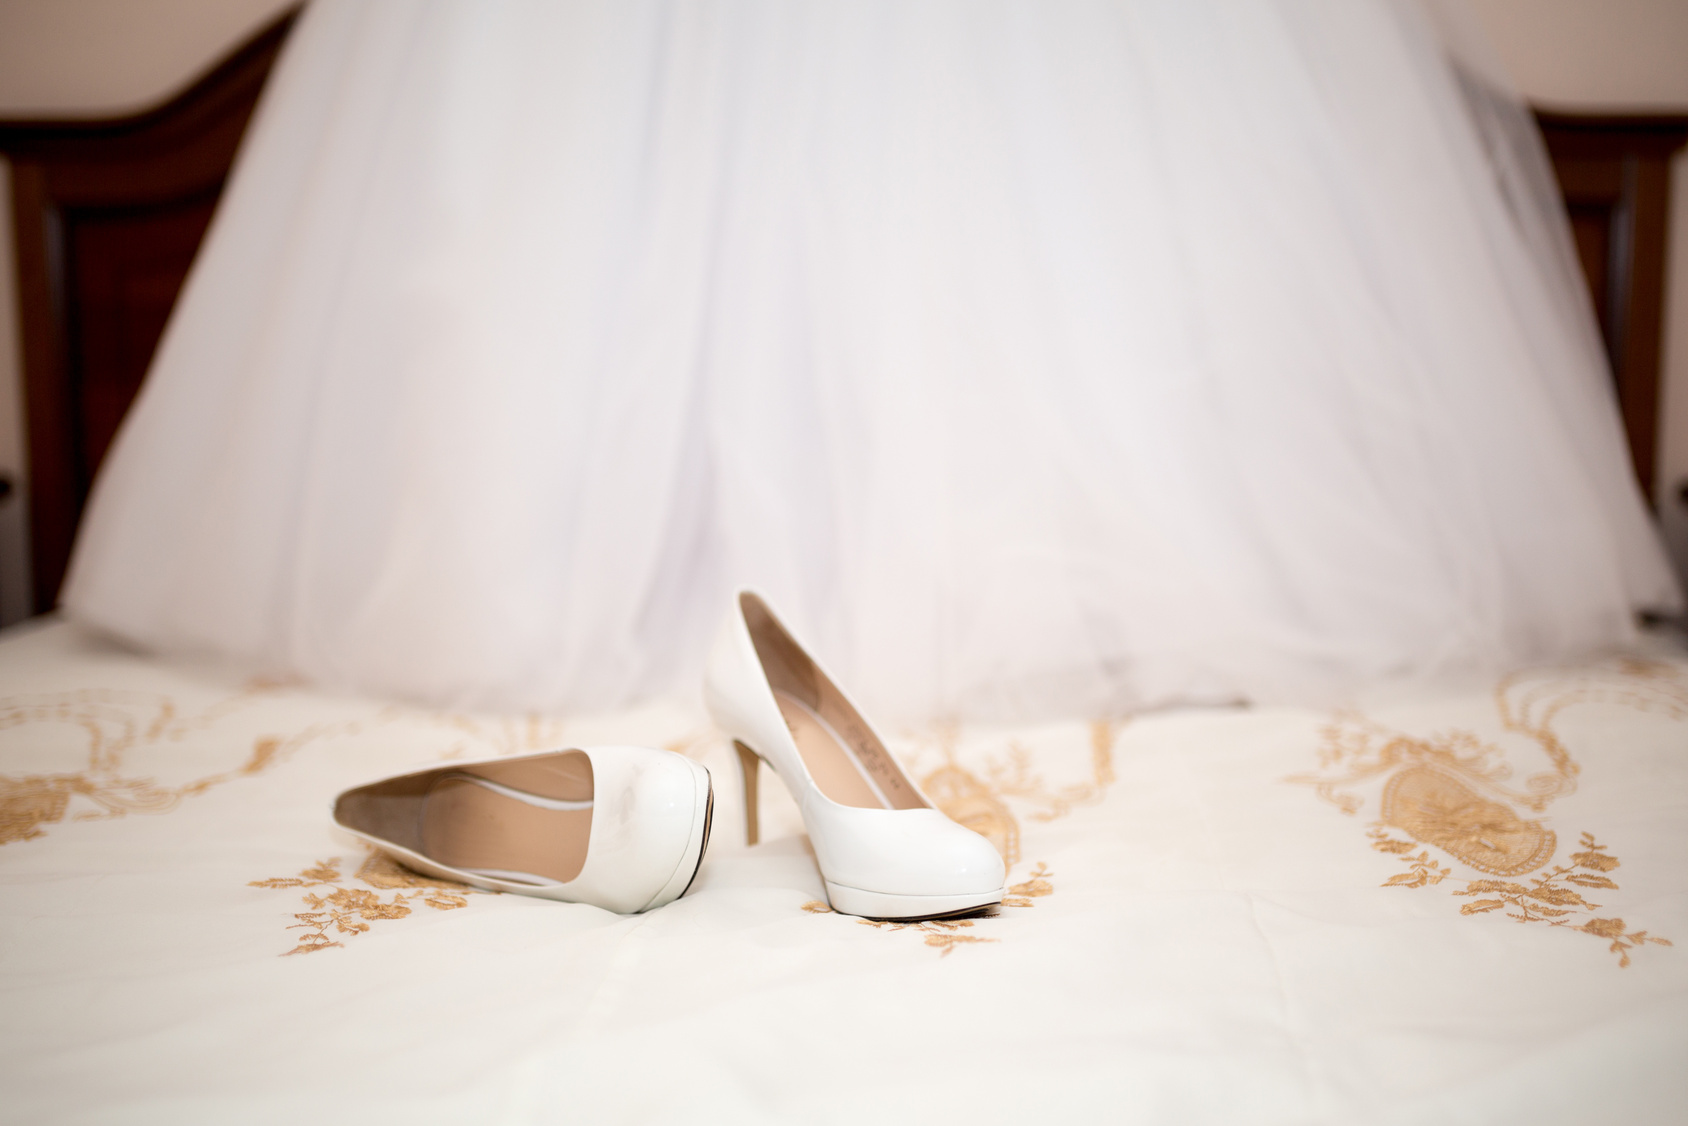 Bridal shoes and dress